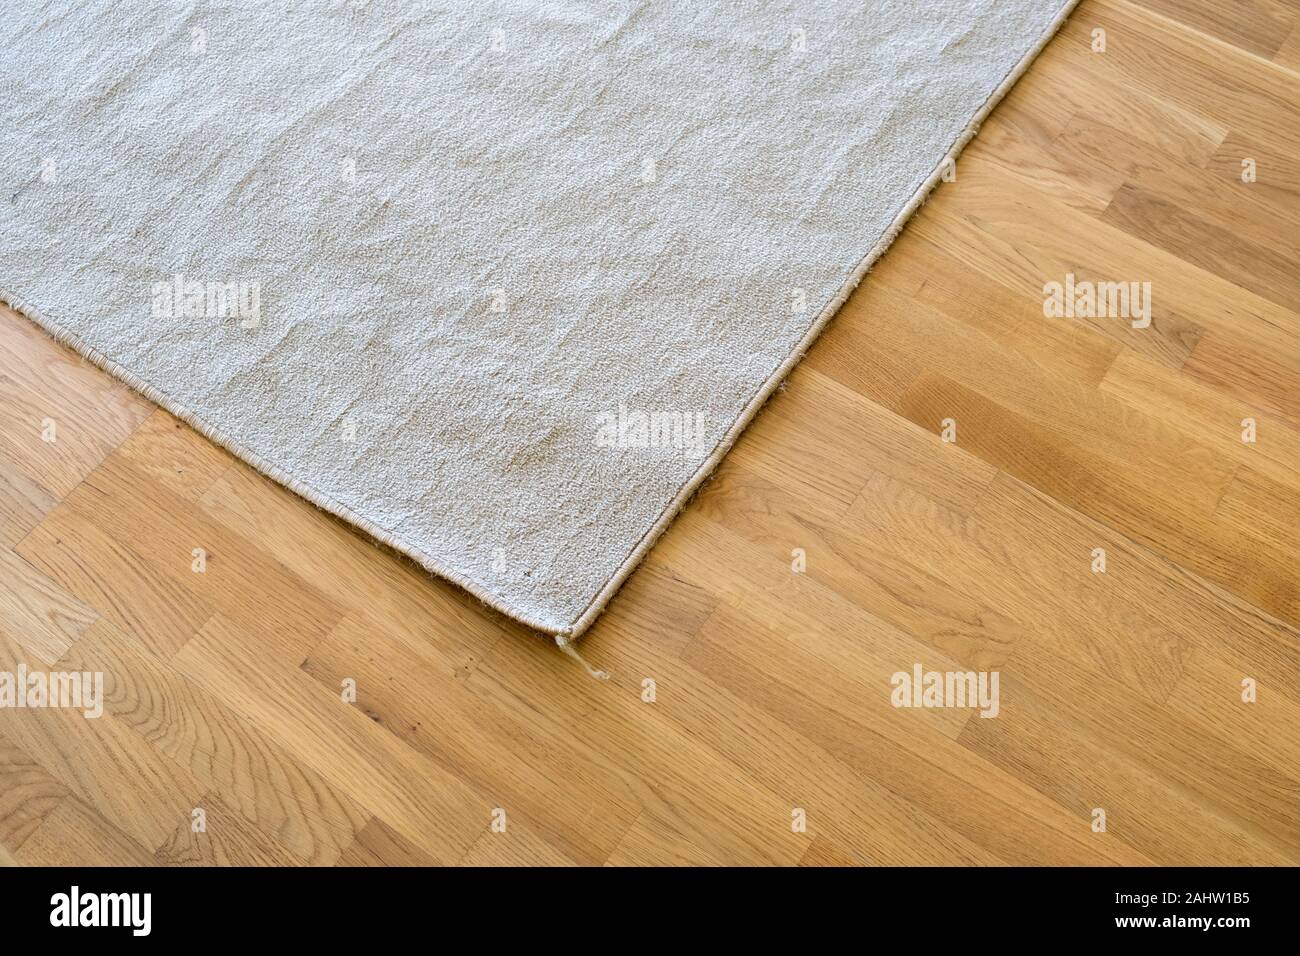 Close Up Of Crumpled Carpet Laying On Parquet Wooden Floor Stock